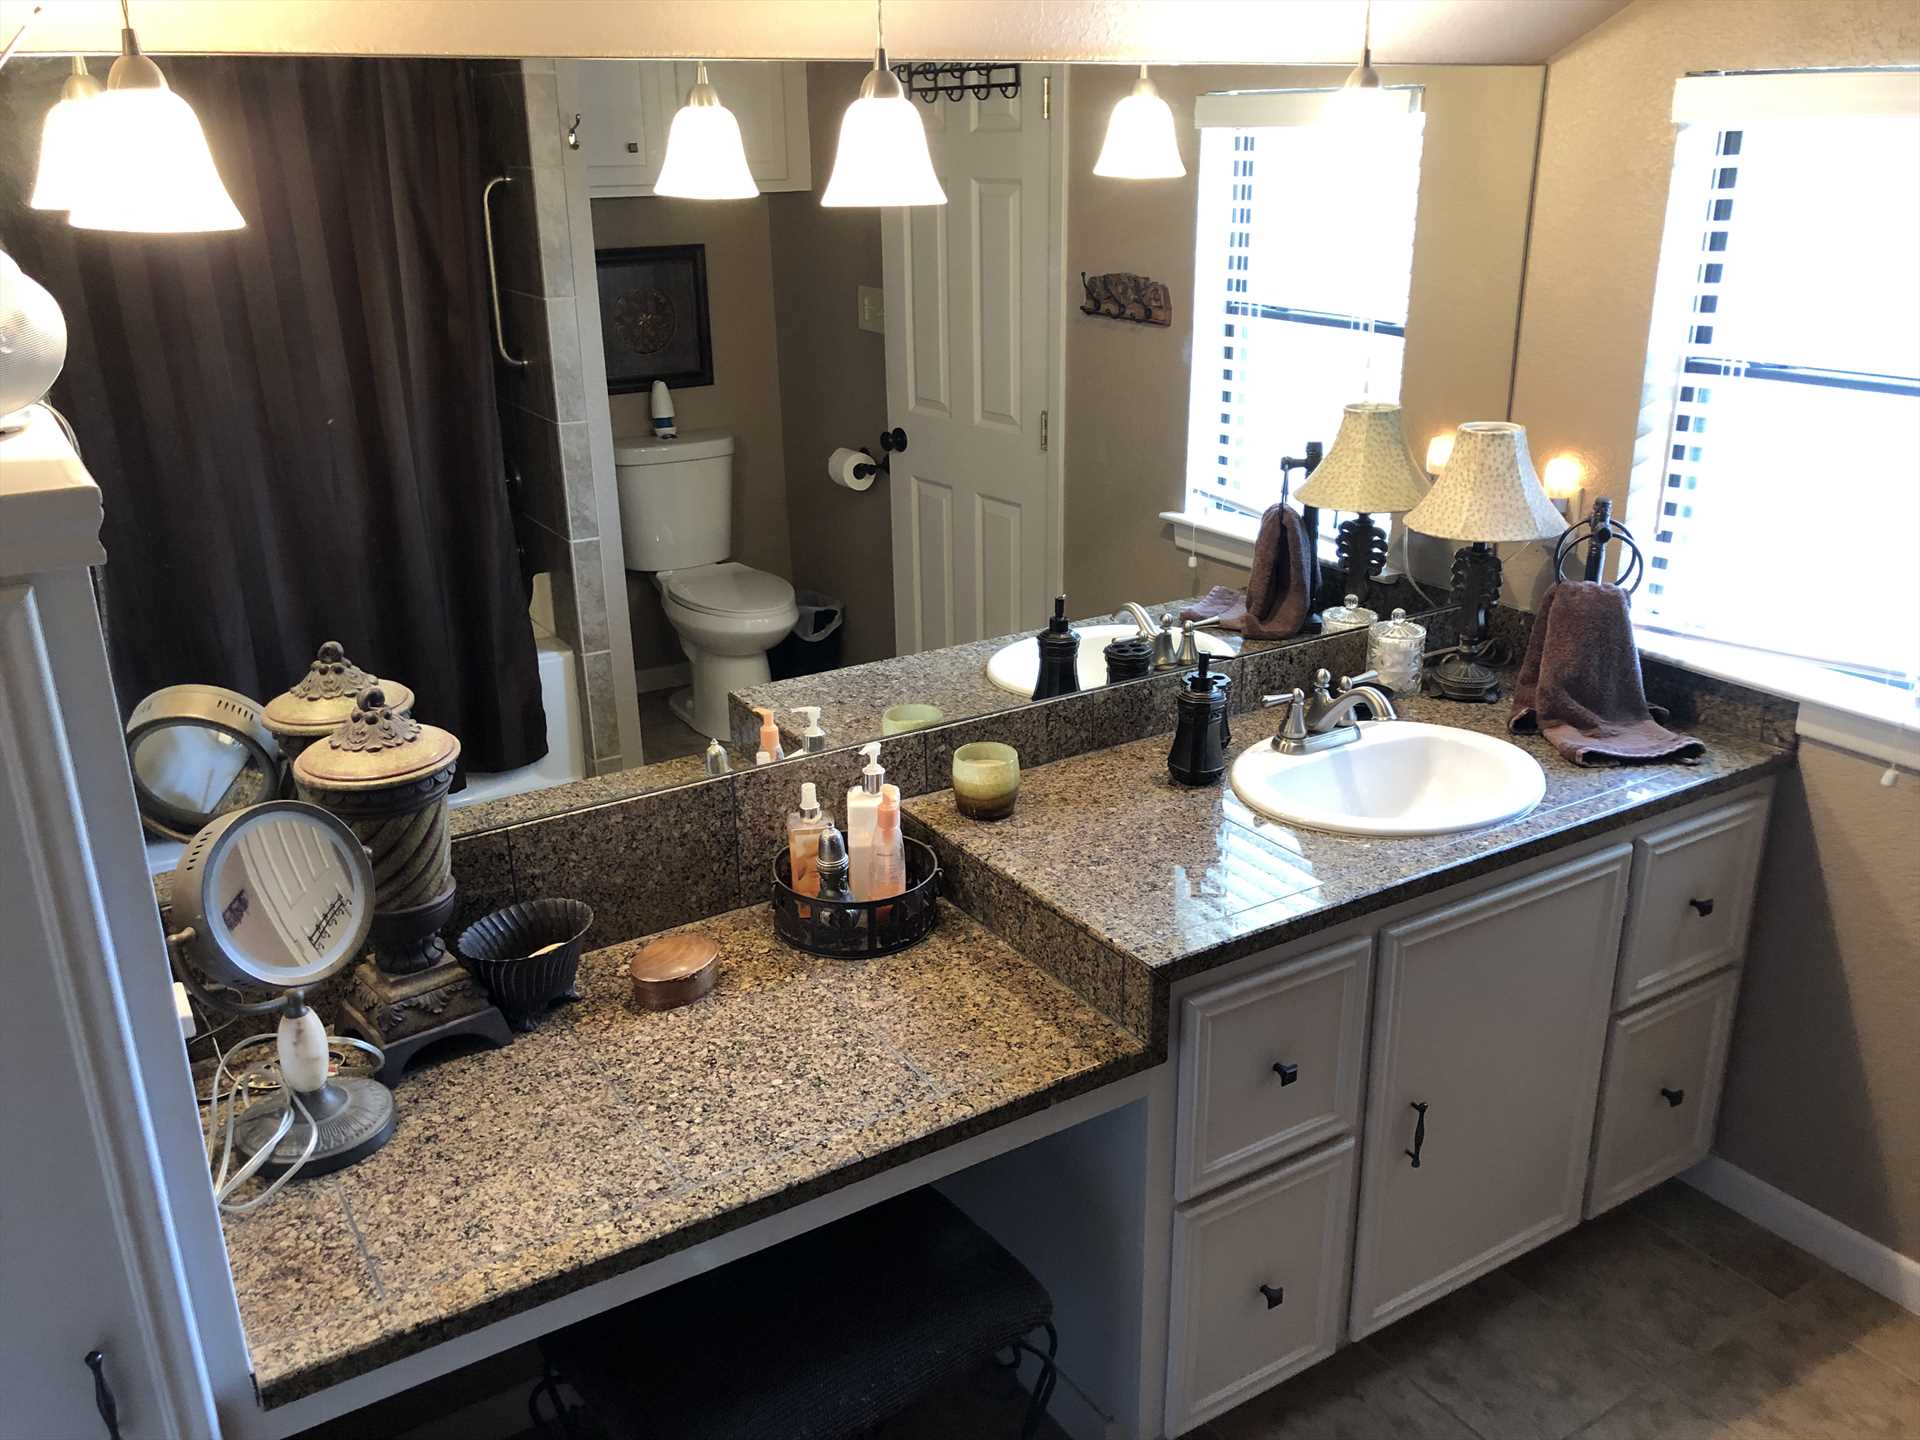                                                 The master bath includes a roomy mirrored vanity and tub and shower combo. Clean bath linens are provided for guests throughout the house, too.